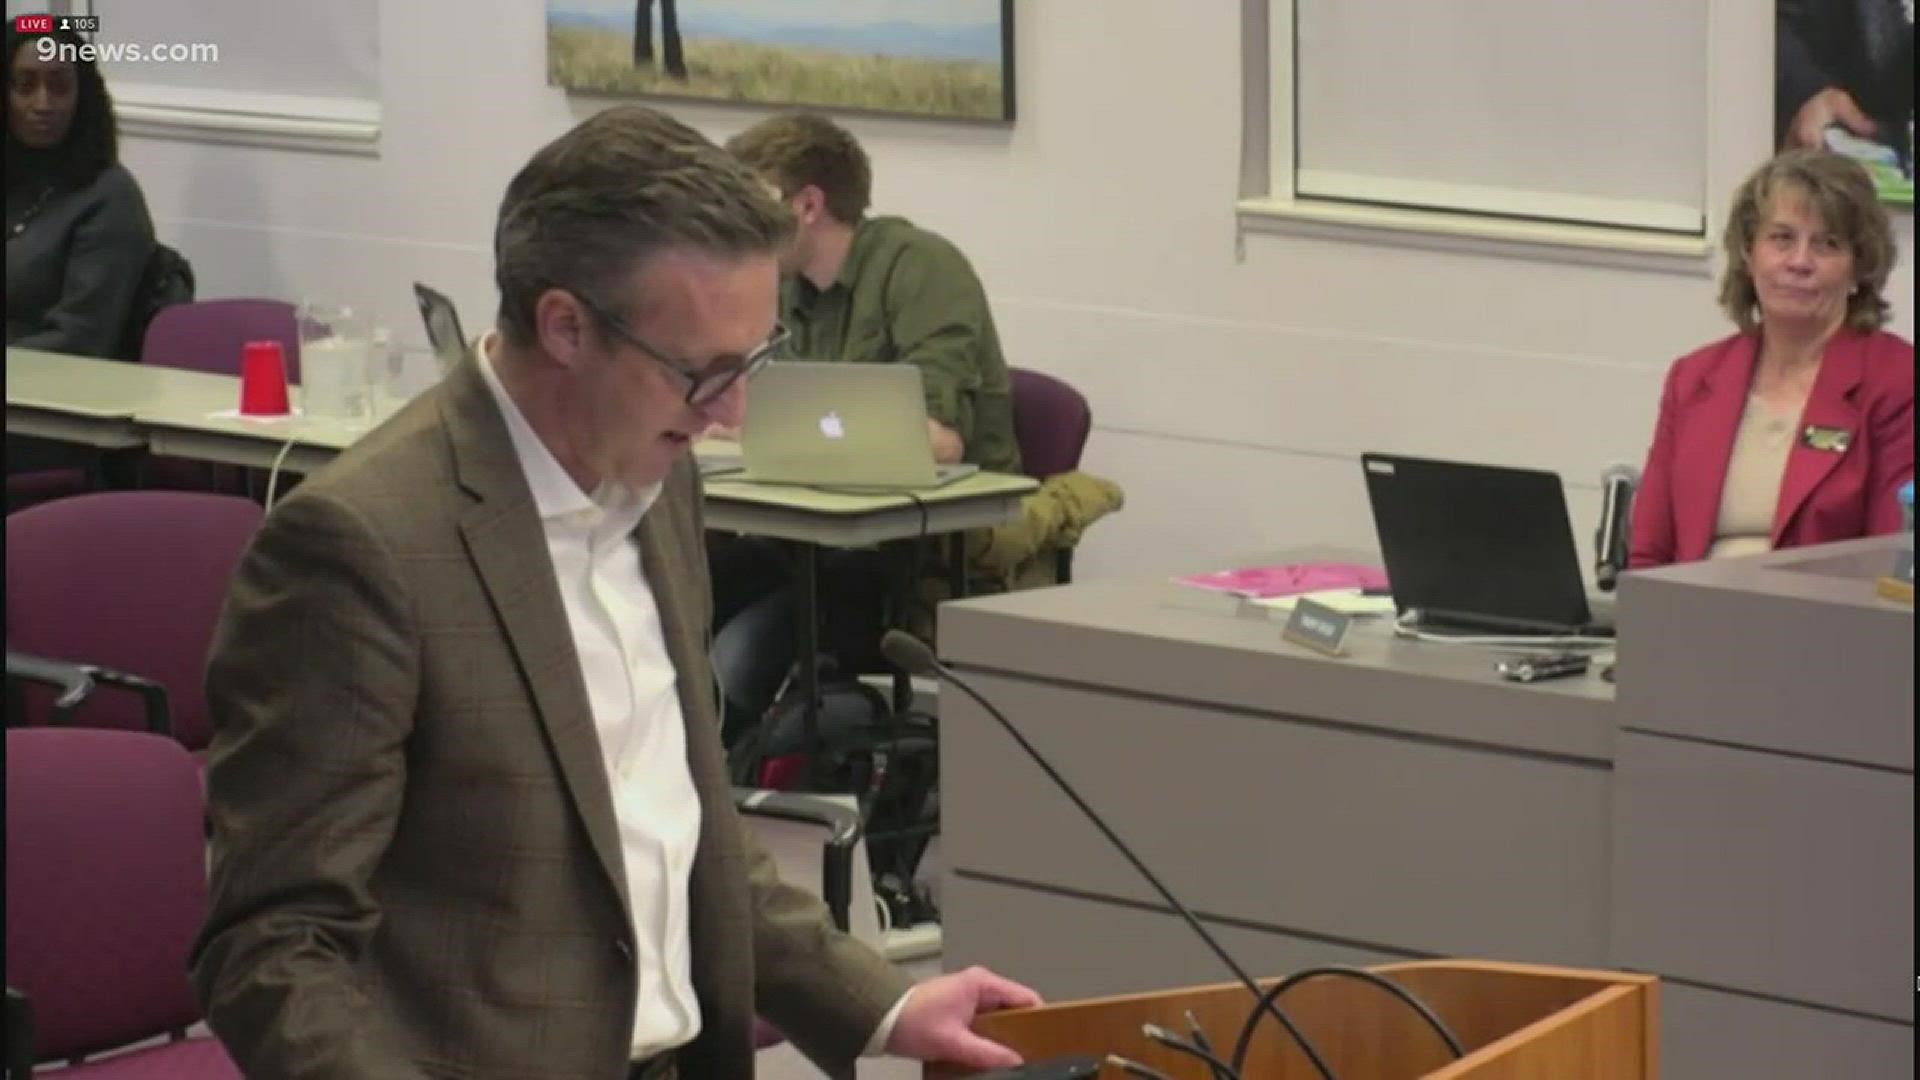 A man attempting to ask the Douglas County School board about Michelle Grissom, the teacher accused of derogatory tweets directed toward a Covington Catholic student, was escorted out of the room.